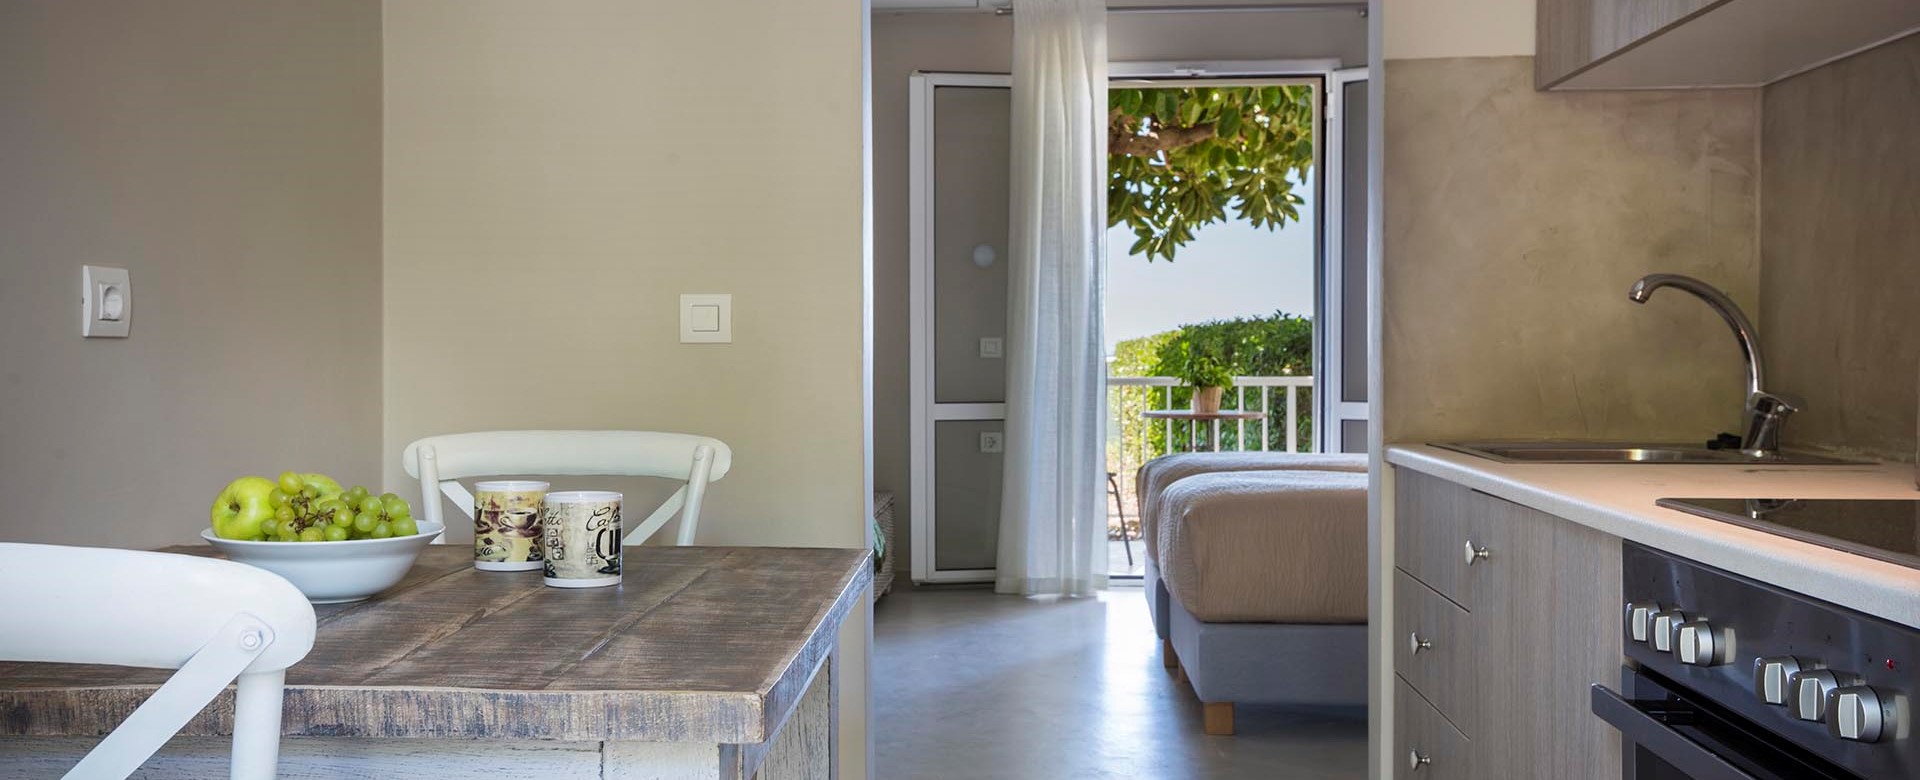 Kitchen, dining and views toward the sea through the French doors inside Beachfront Suite No2, Lourdata, Kefalonia